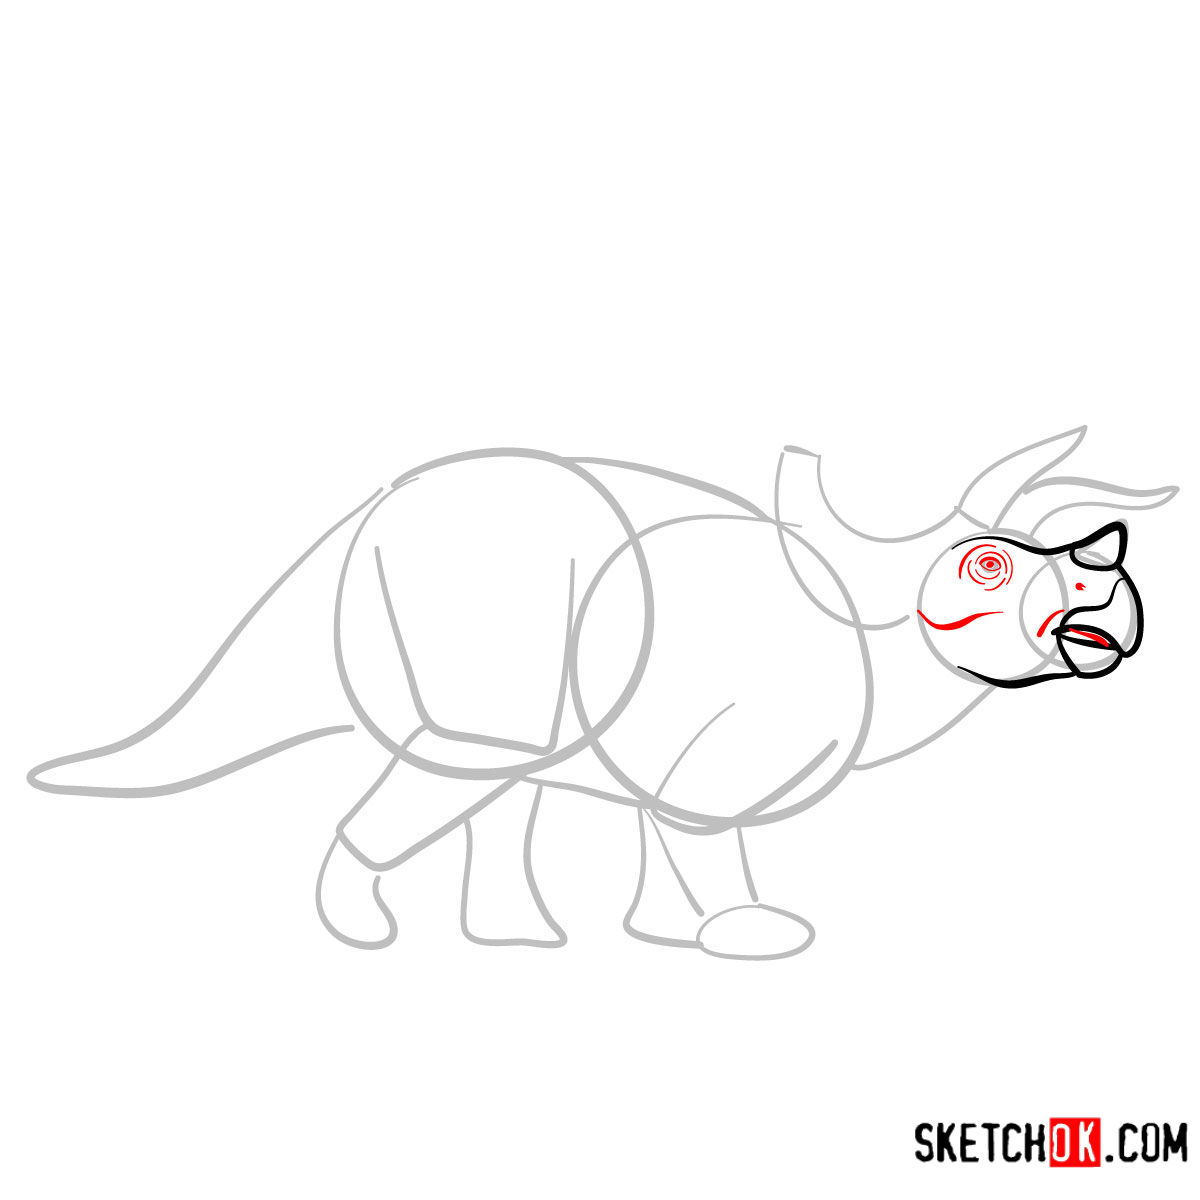 How to draw a Triceratops | Extinct Animals - step 04